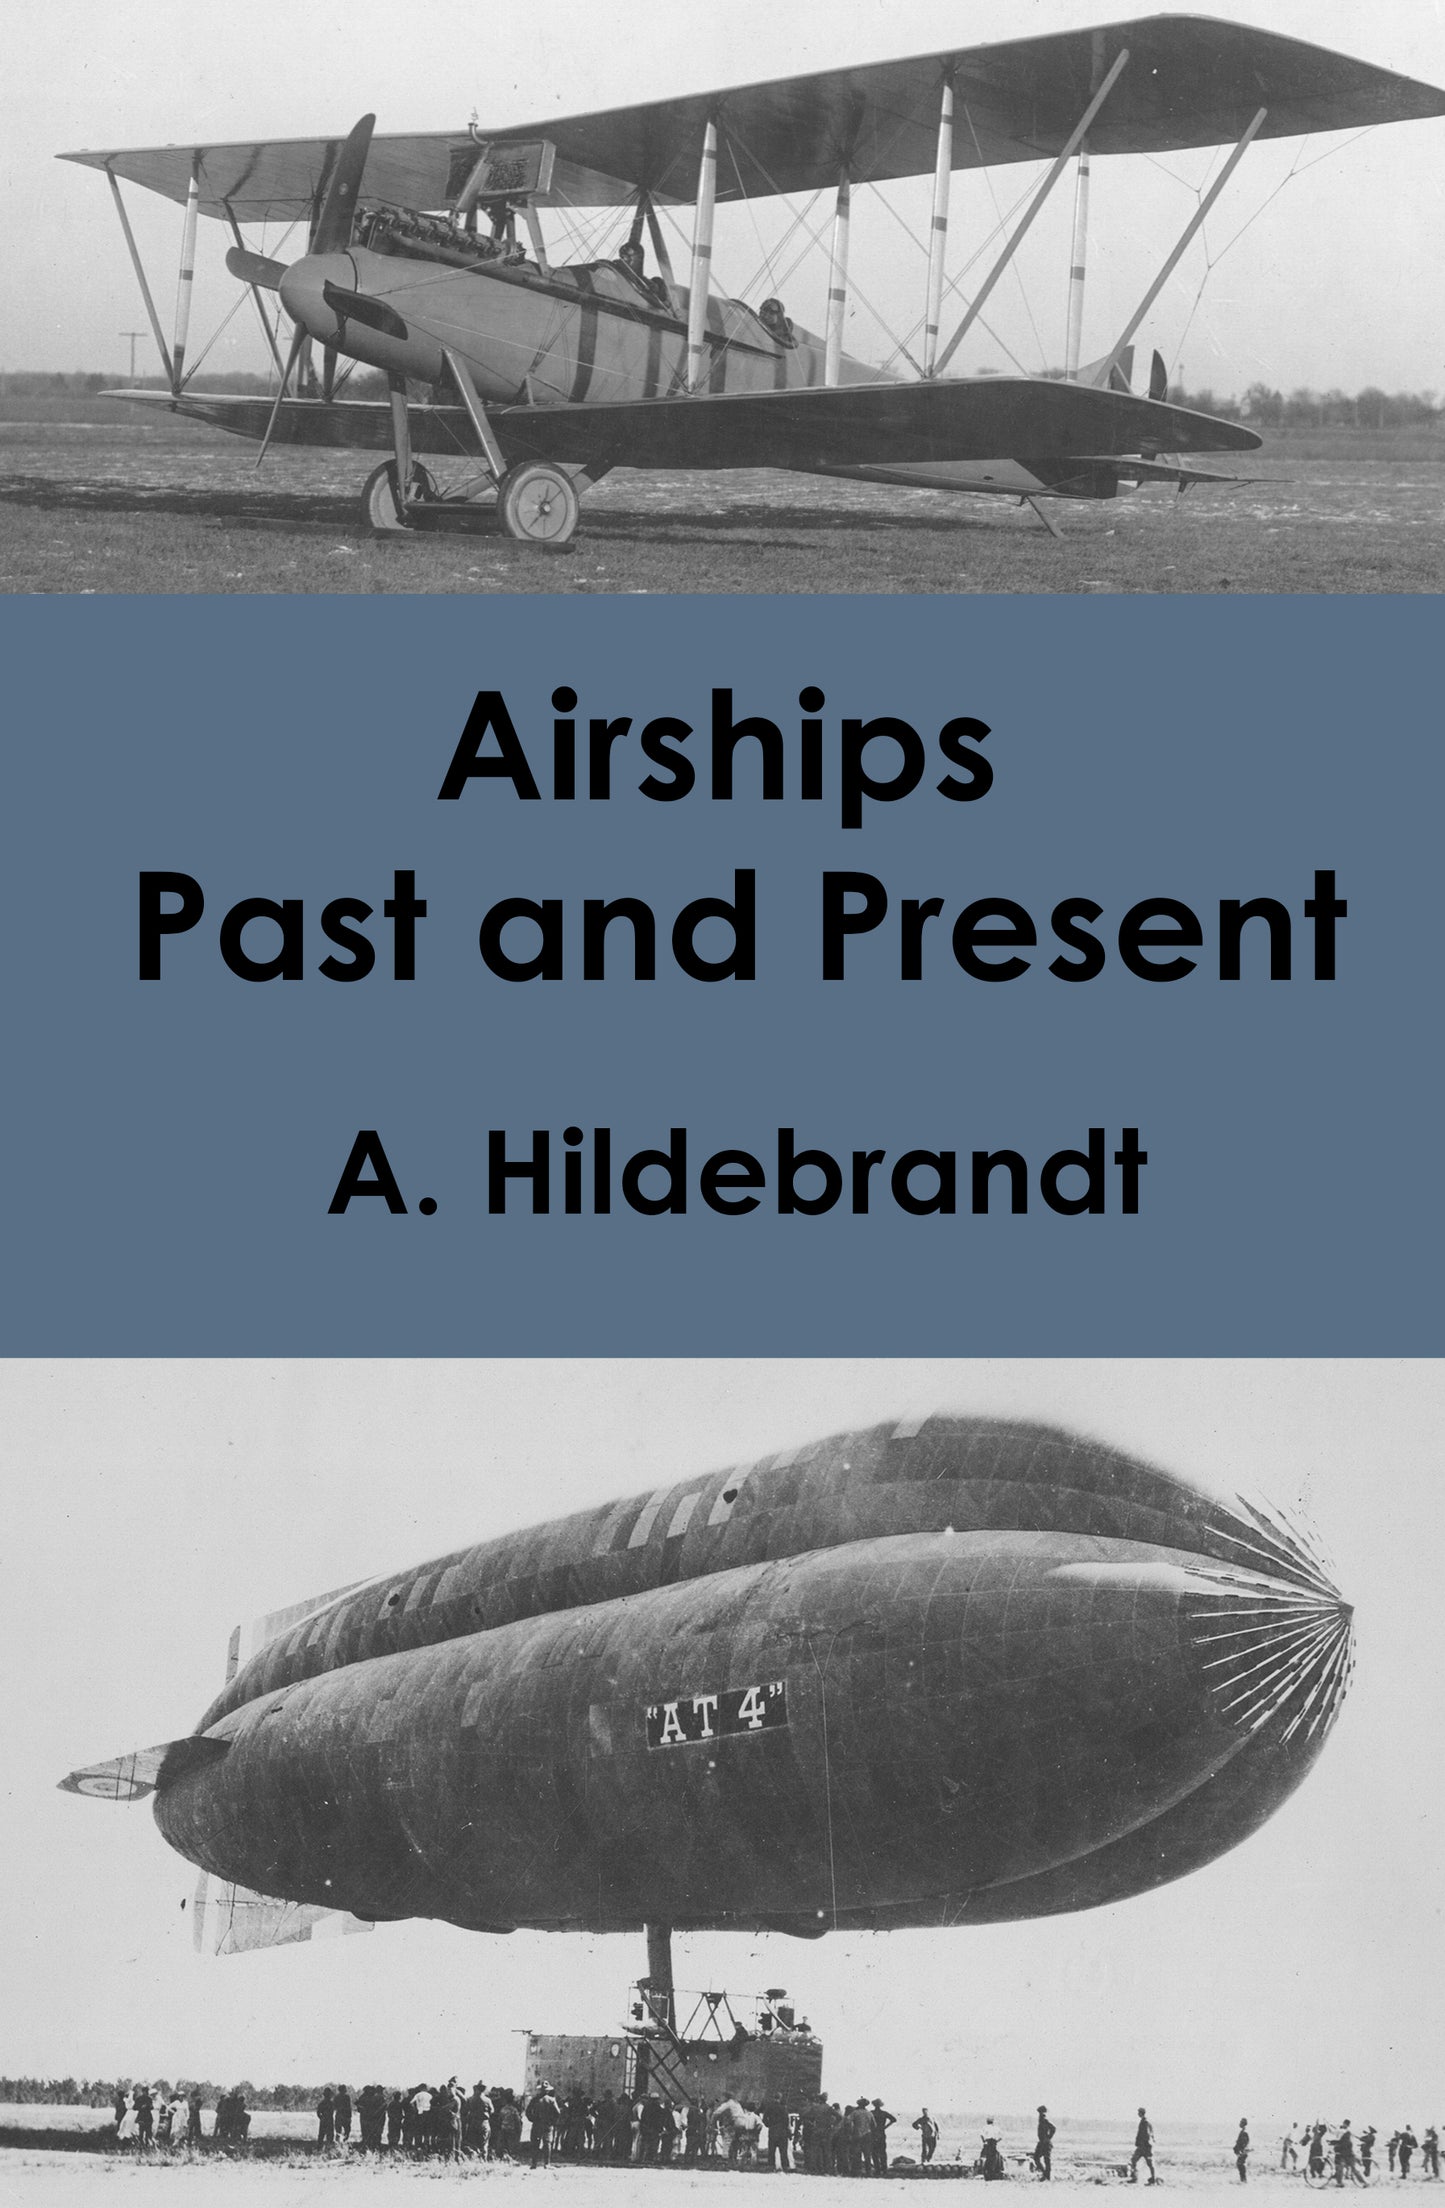 Airships Past and Present